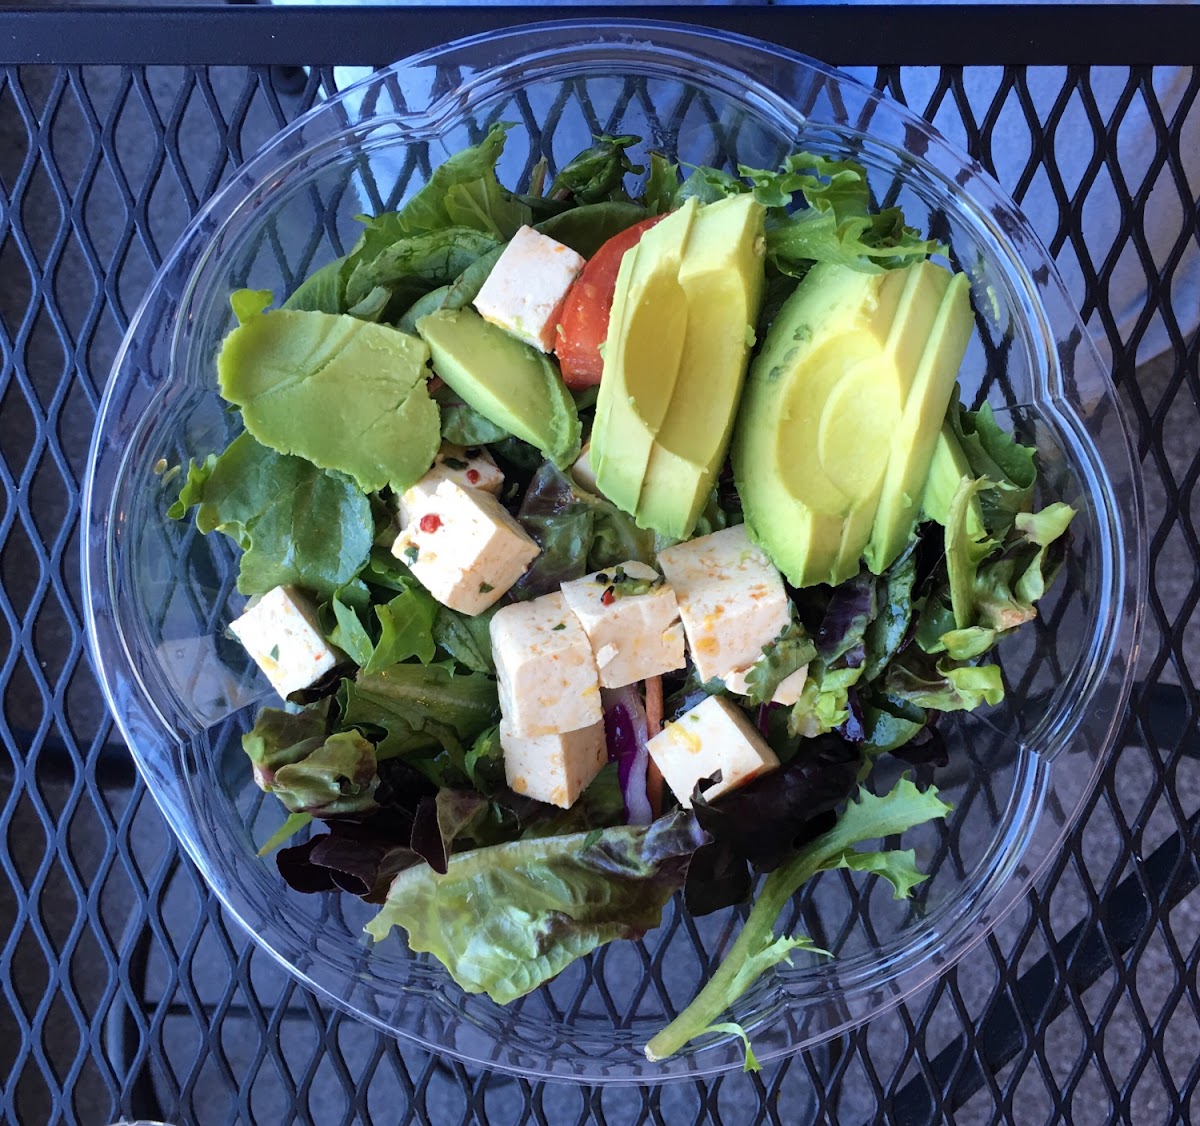 Green salad with marinated tofu and avocado with vinegar and oil dressing.